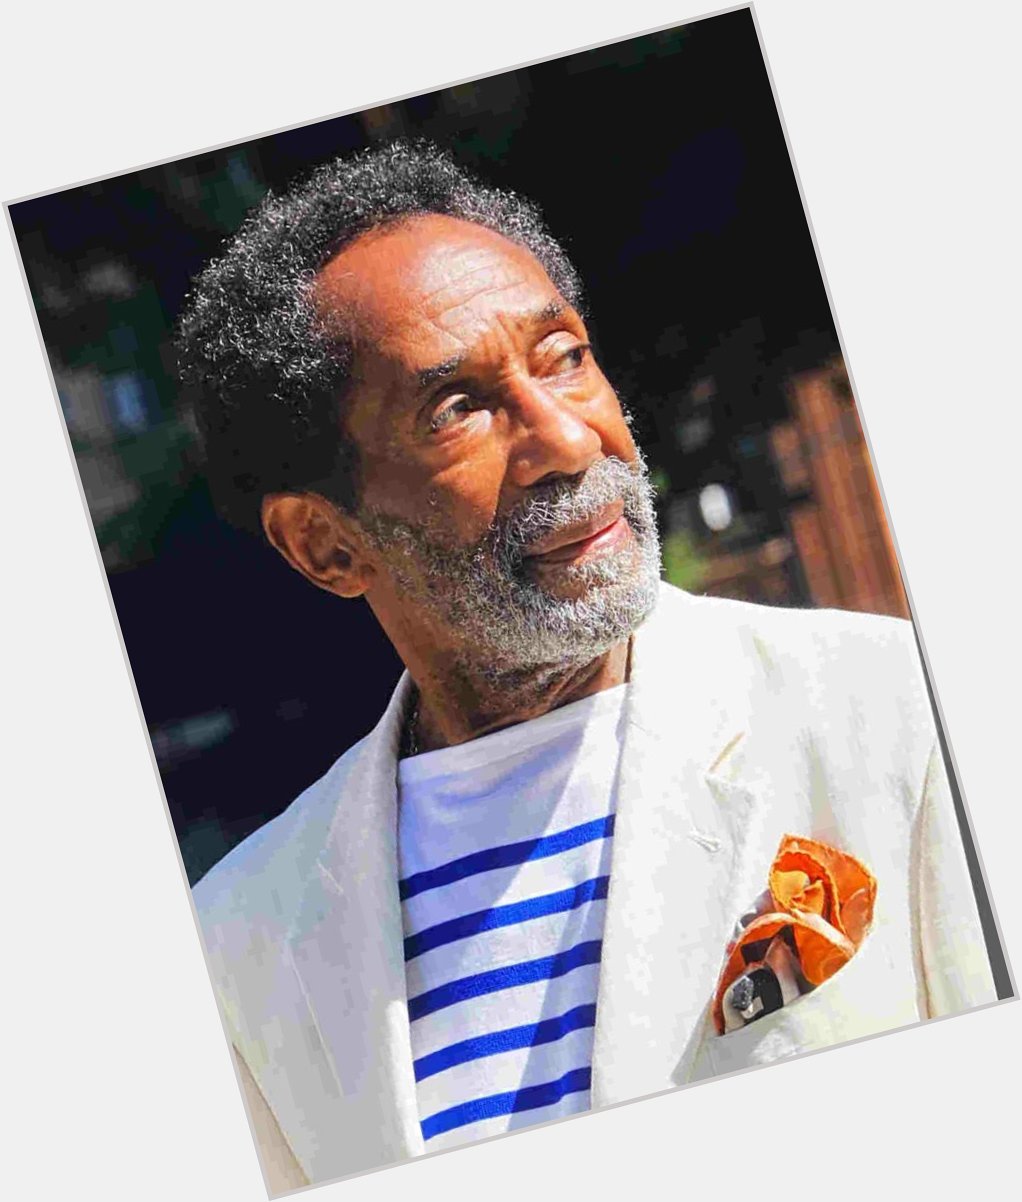 Ron Carter 85 years-old today with a Breton Picasso shirt and a linen jacket. Happy birthday, Mr. Carter! 